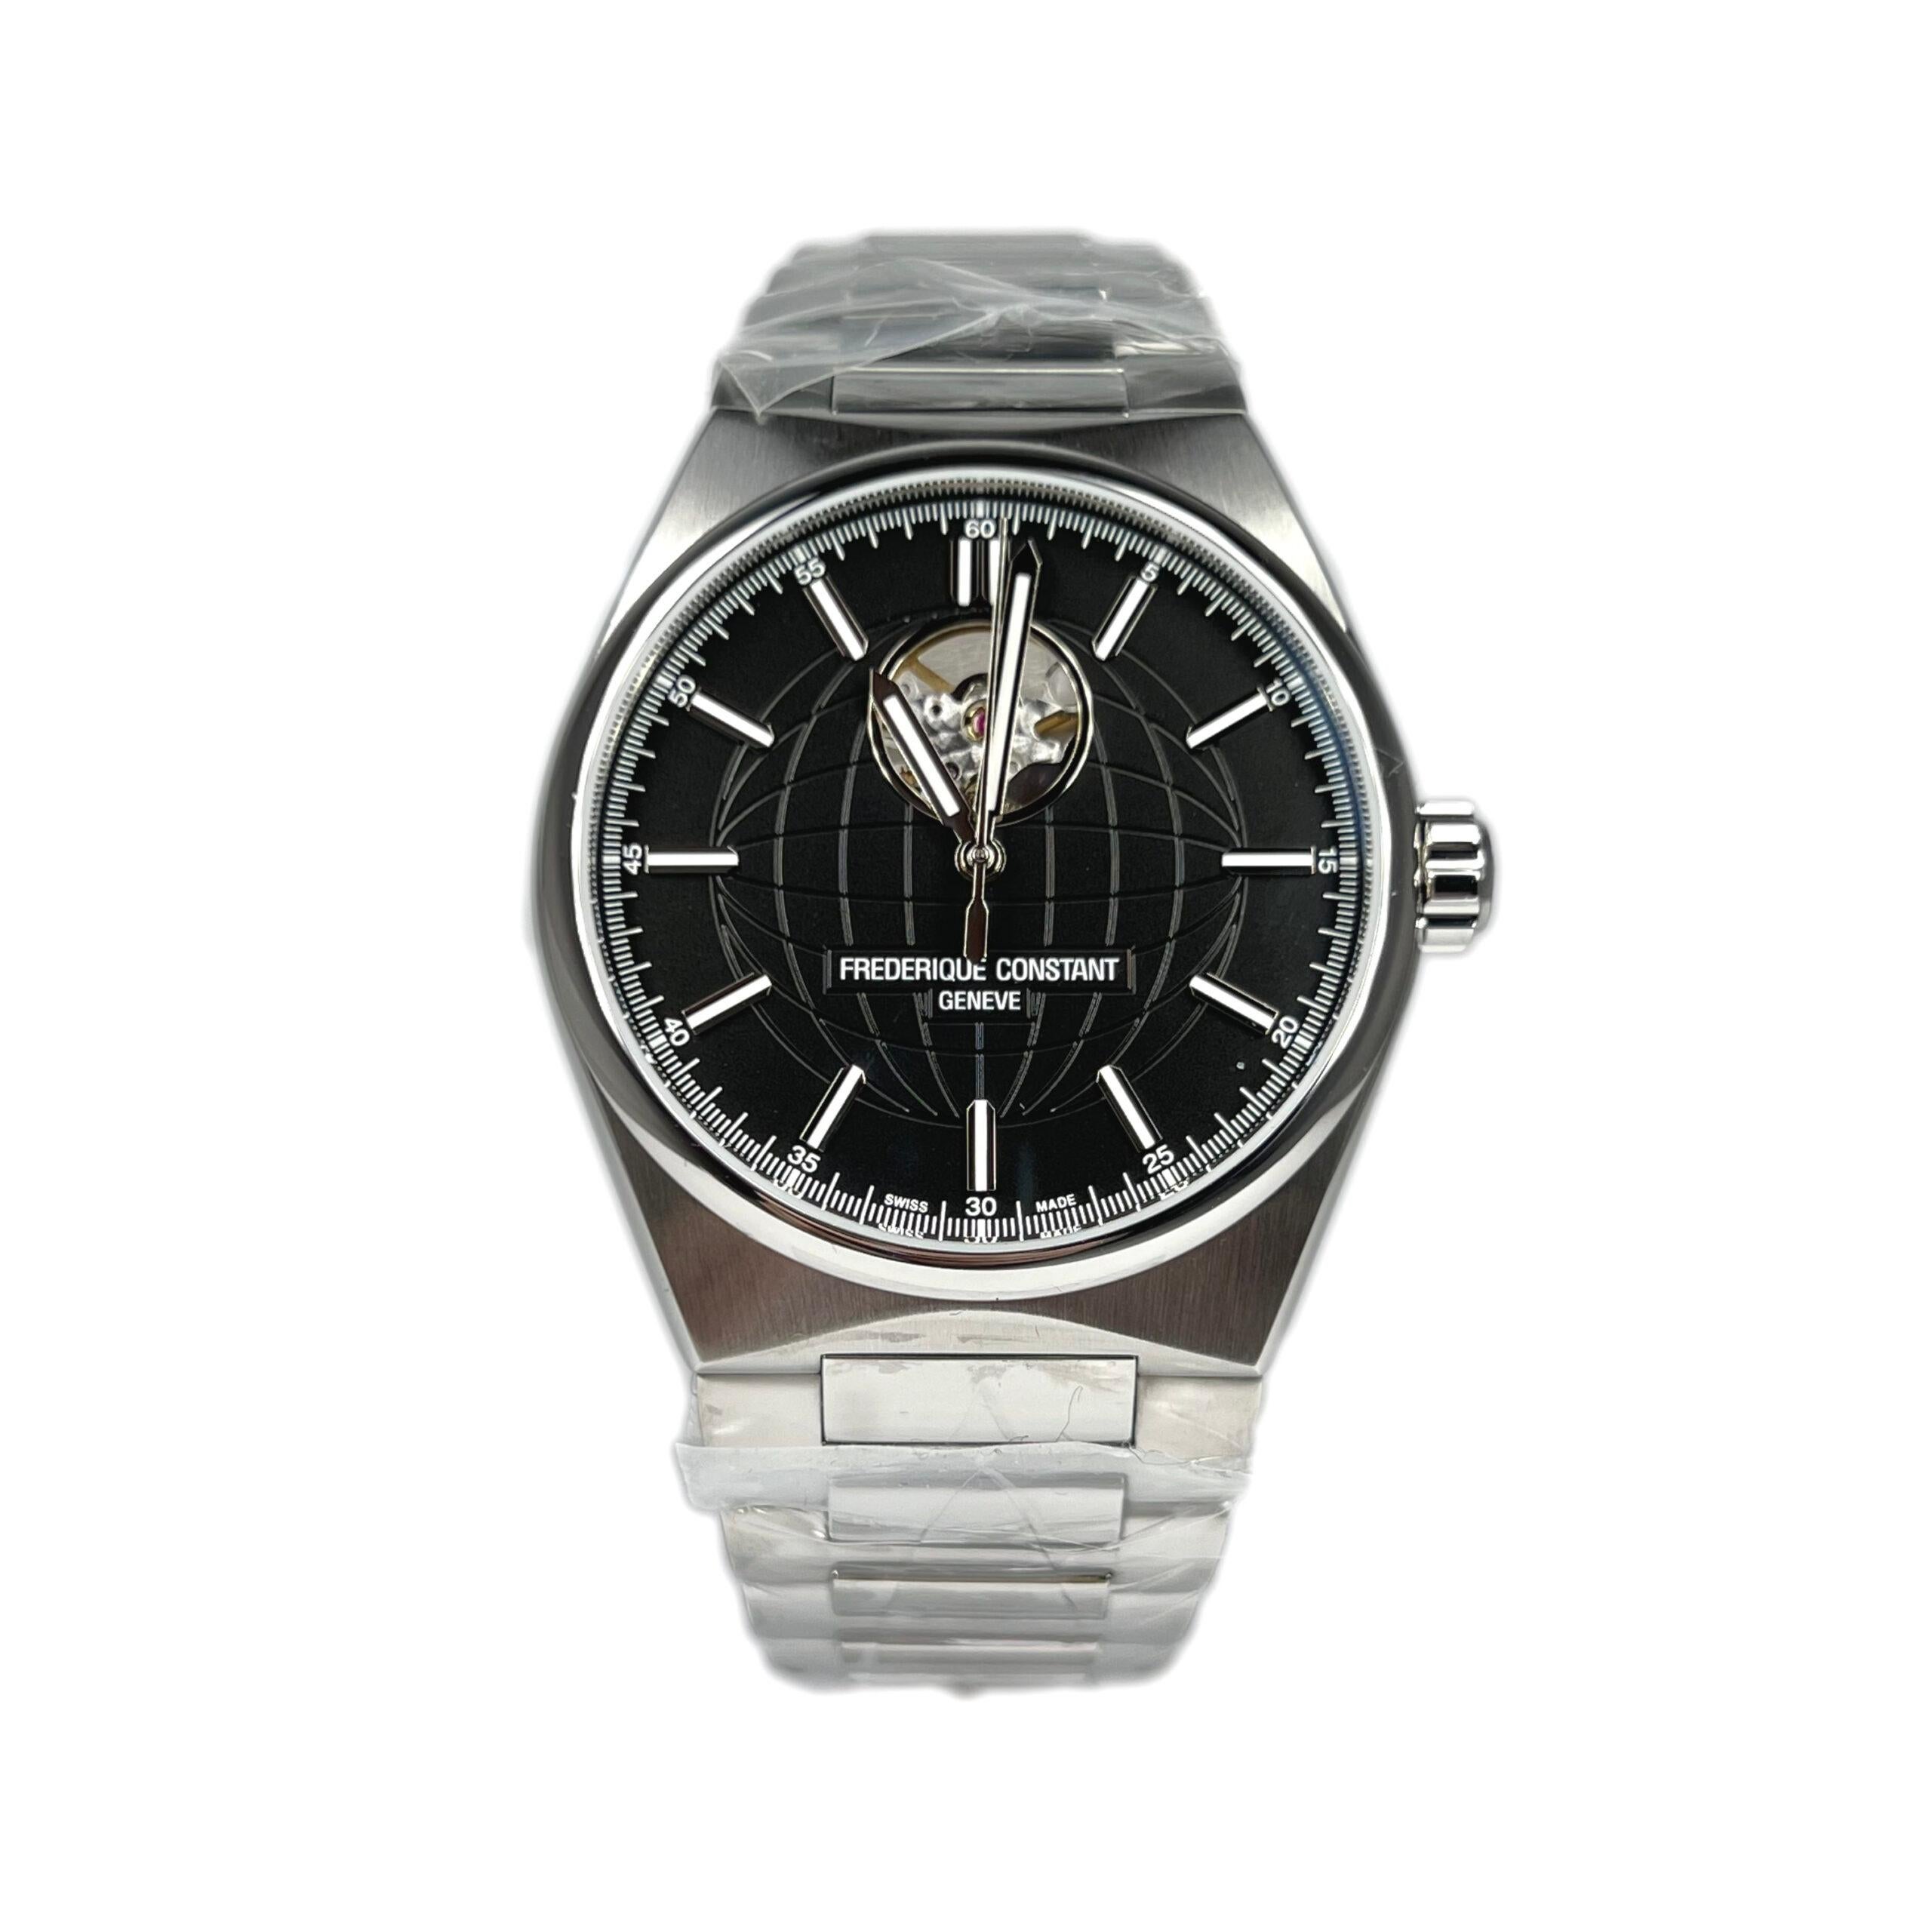 This Man’s Watch has a 41 mm stainless steel case with a stainless steel bracelet. Fixed stainless steel bezel. Black (open heart) dial with luminous silver-tone hands and index hour markers. Arabic numeral minute markers (at 5 minute intervals).